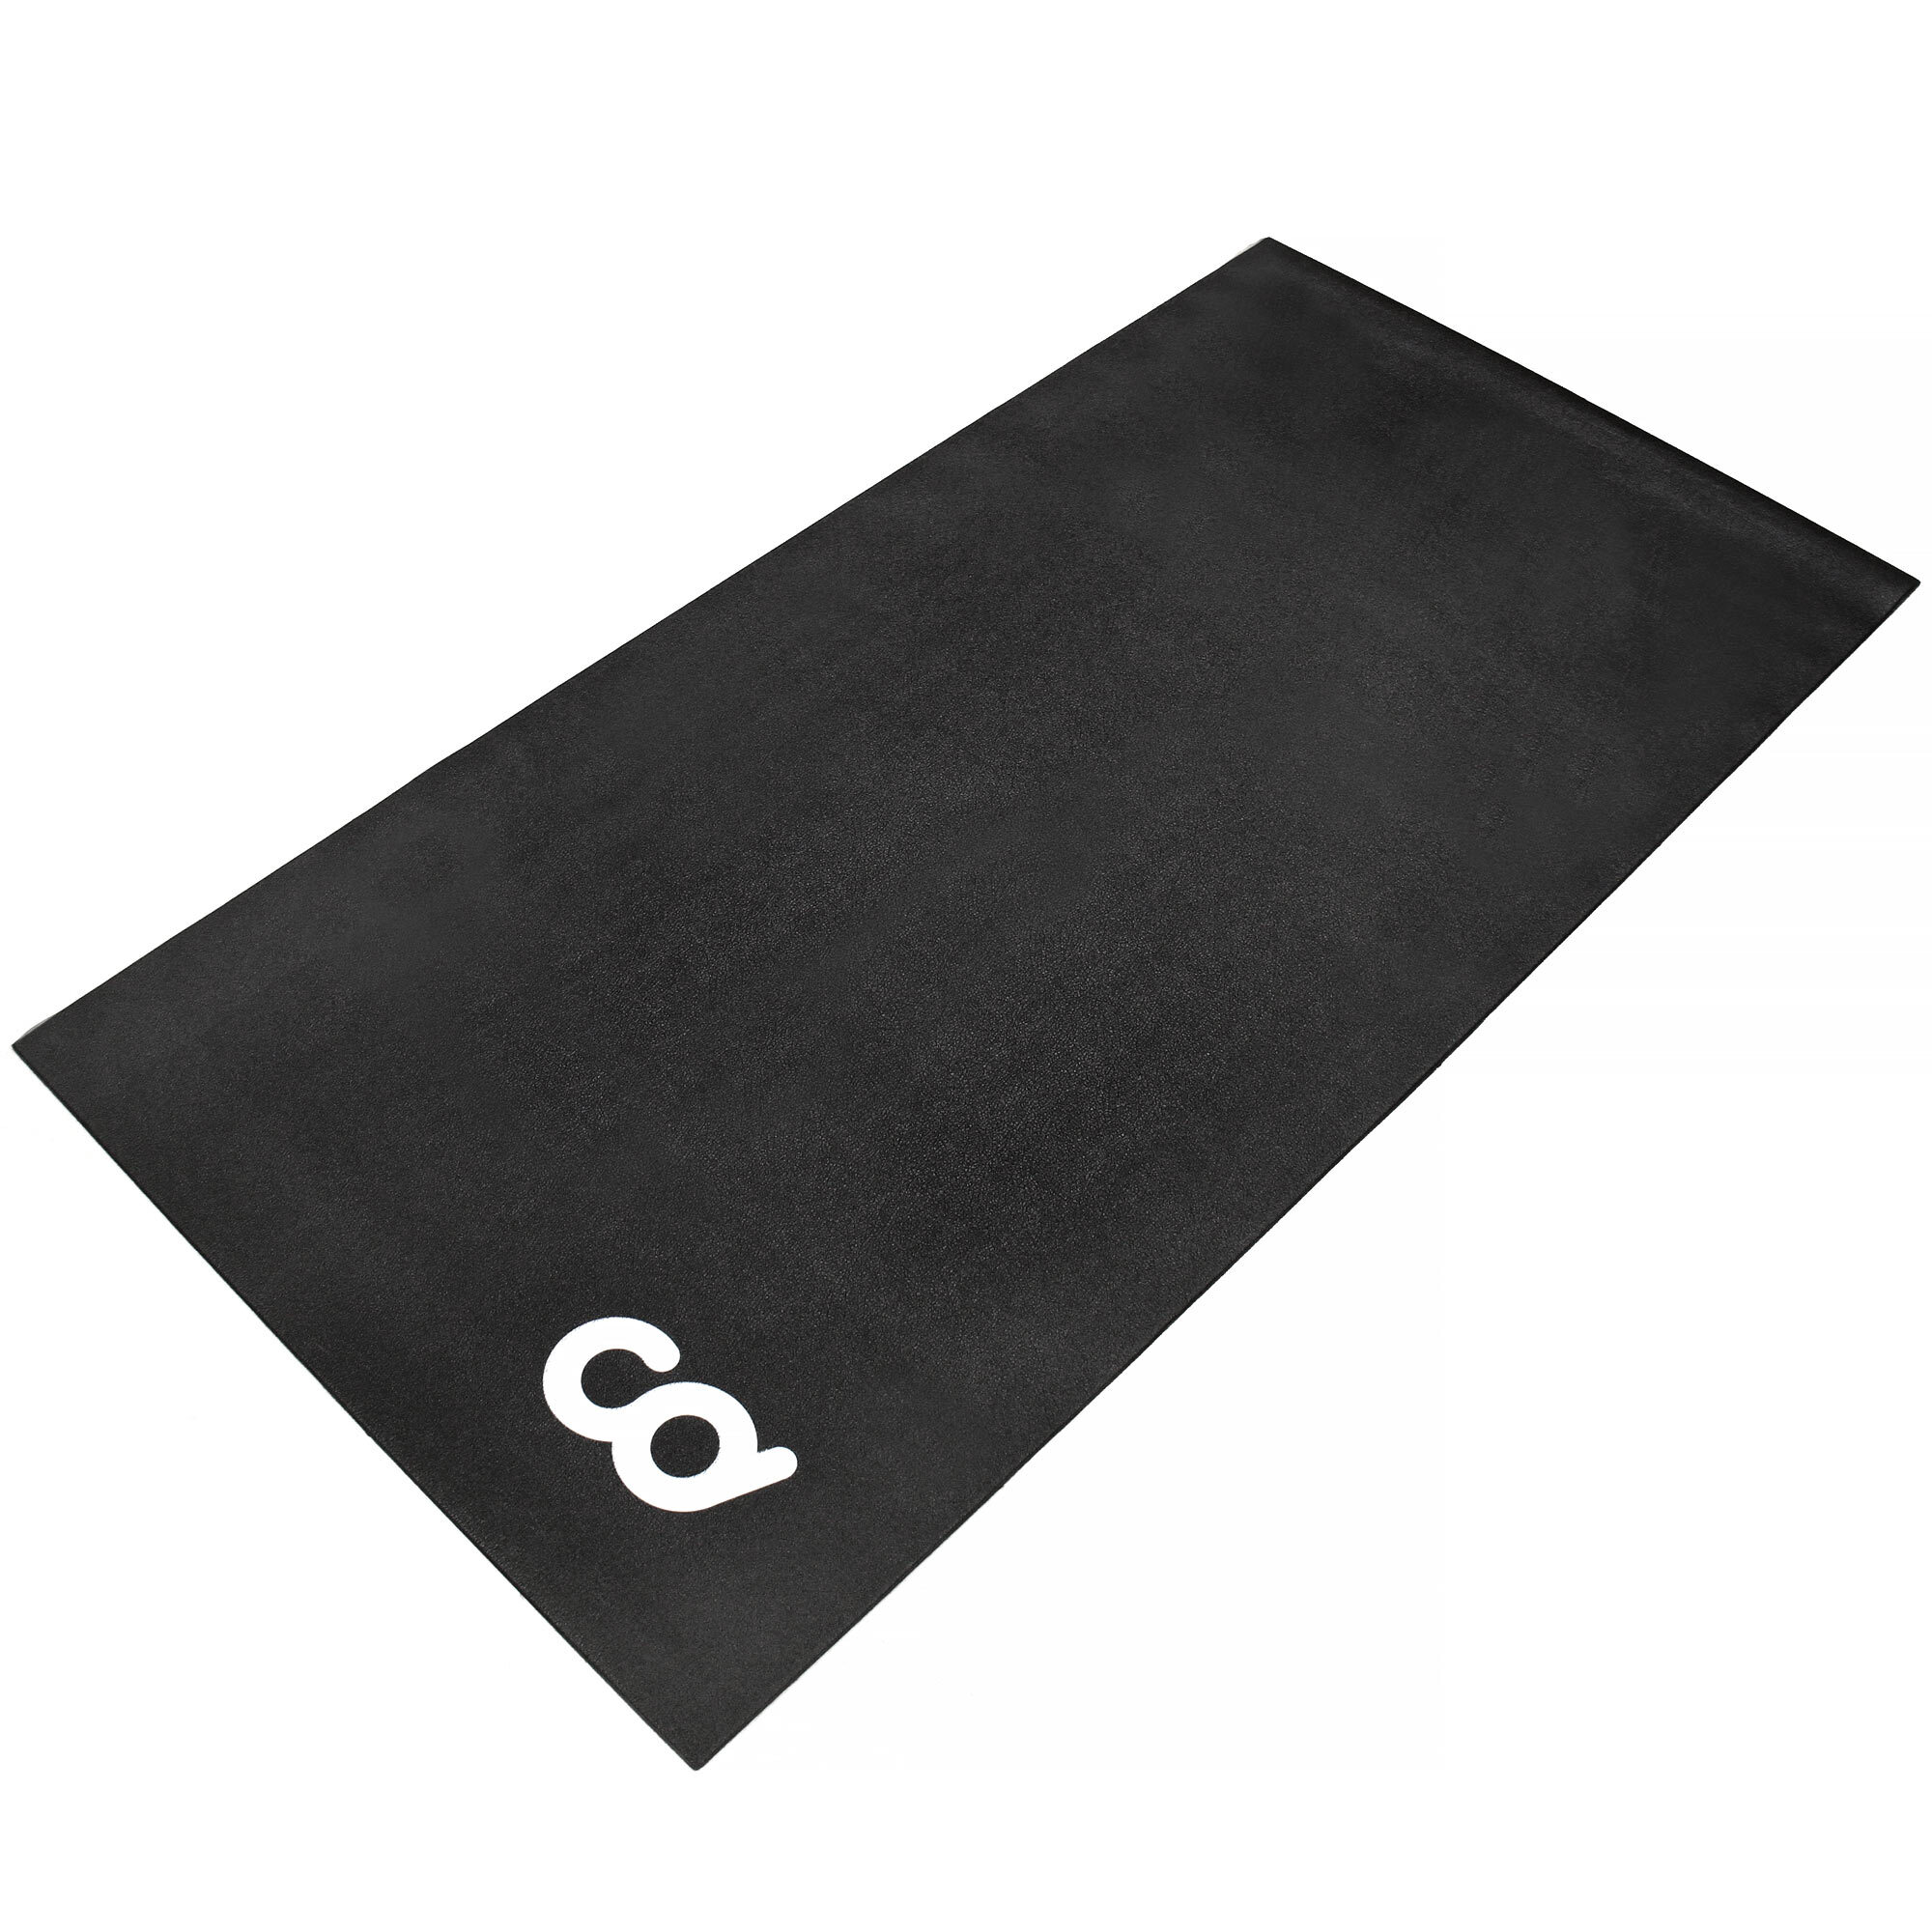 Bicycle Trainer Spin Bike Floor Mat Indoor Cycle Exercise Equipment Gym Flooring 30"x60" (76cm x 152cm)